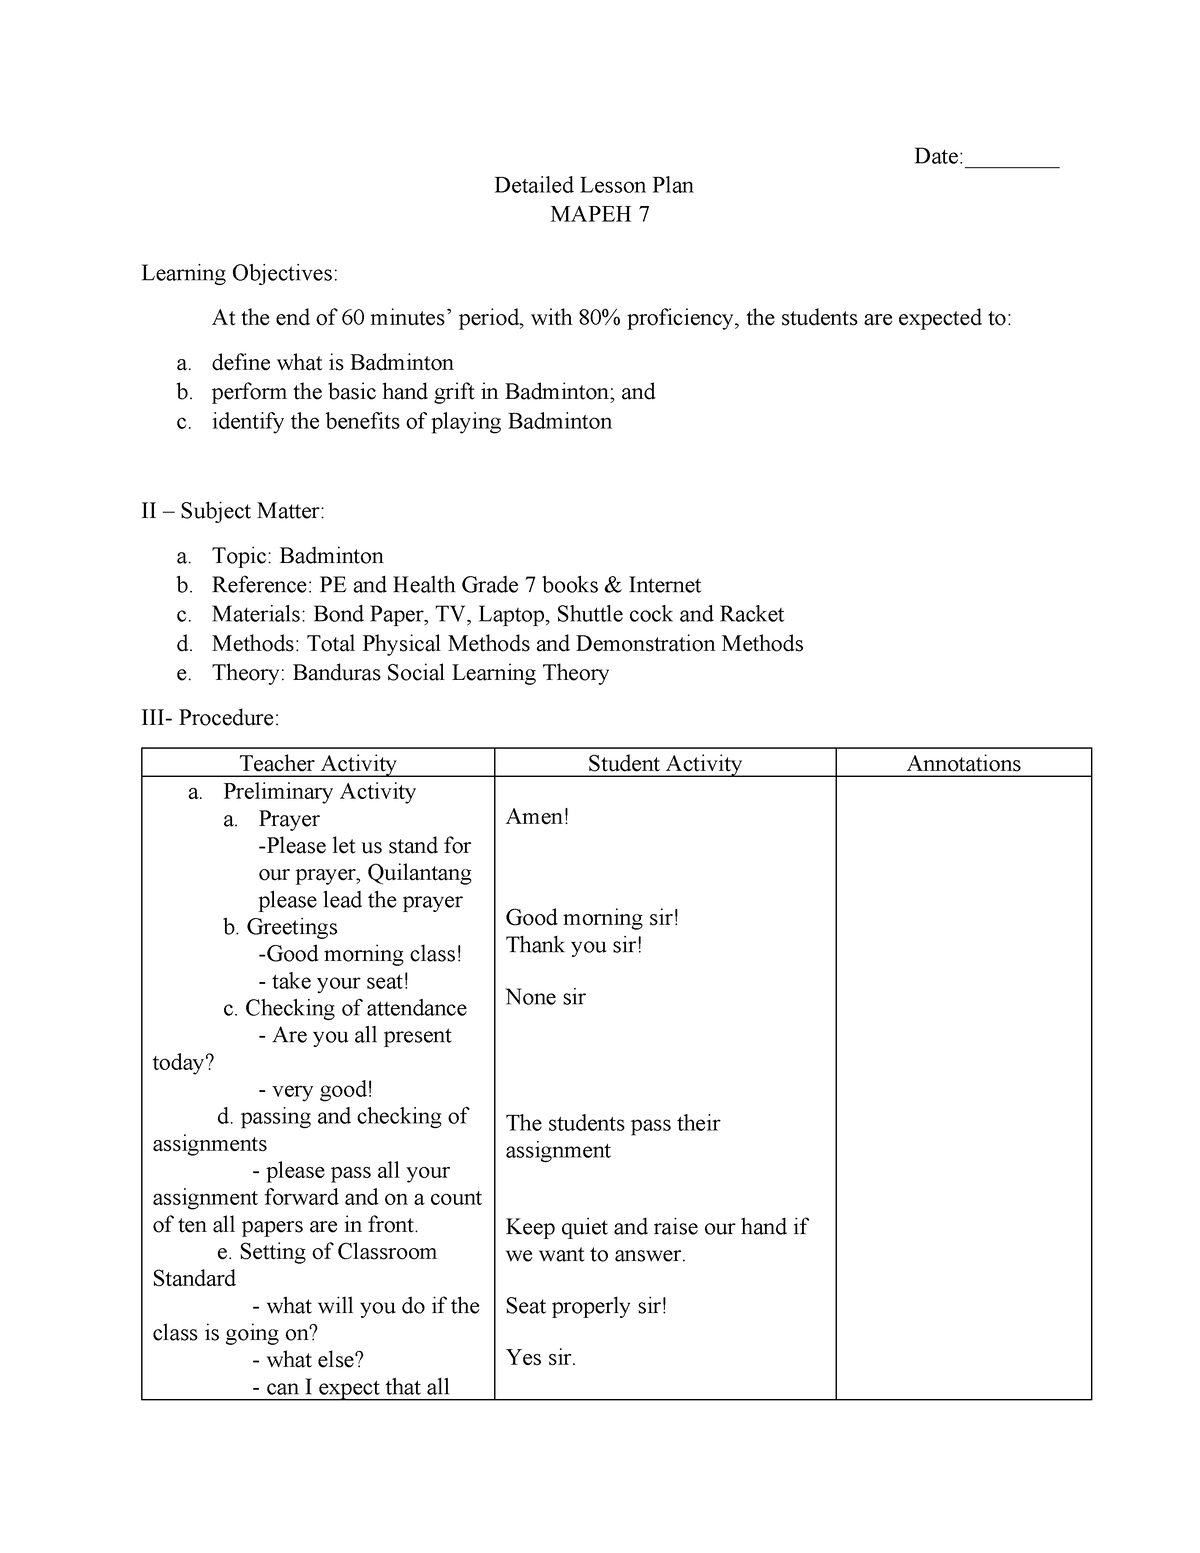 Lesson Plan For 2024 Date Detailed Lesson Plan Mapeh 7 Learning Objectives At The 4444